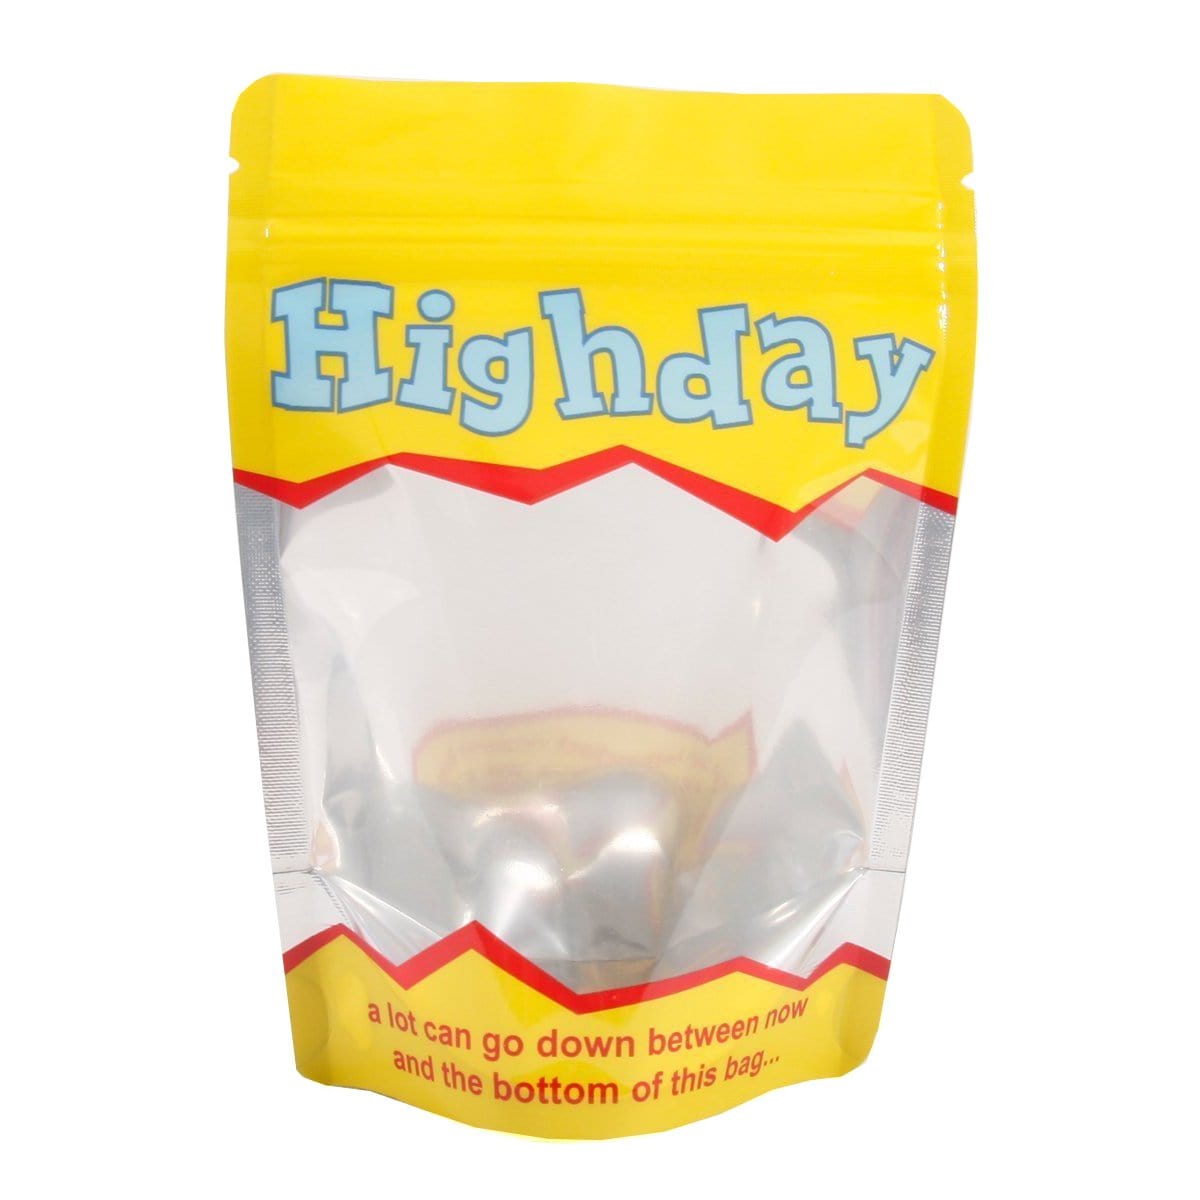 10-Pack Highday-Friday Smell Proof Mylar Bag | 1/8th ounce to 1/4th ounce